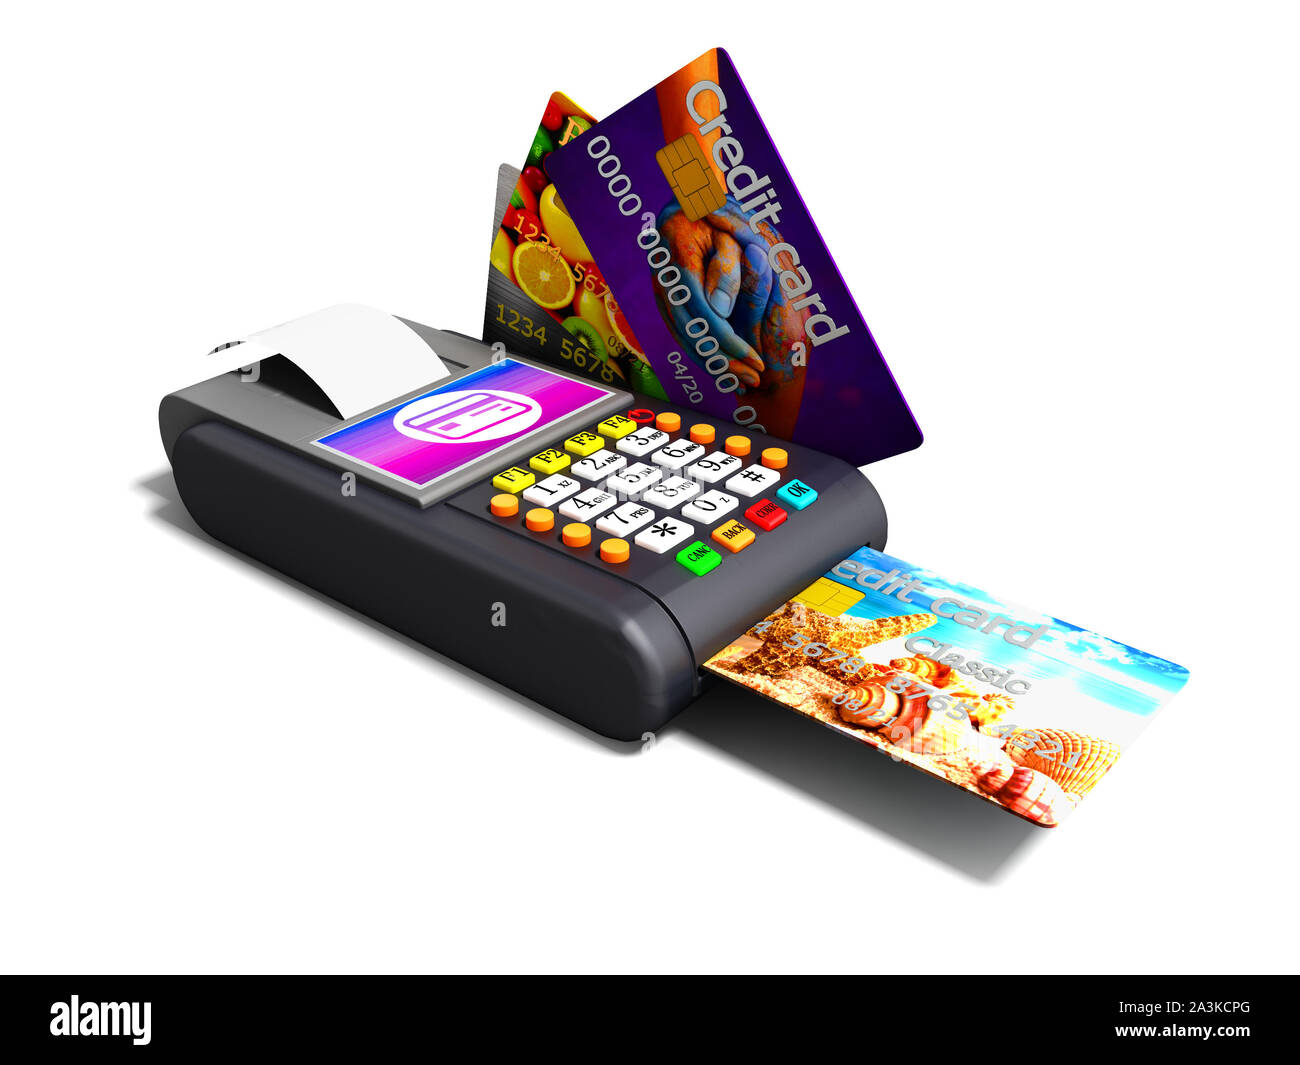 Modern Nfs payment on payment card POS-terminal with credit card inside and outside the left view 3d render on white background with shadow Stock Photo